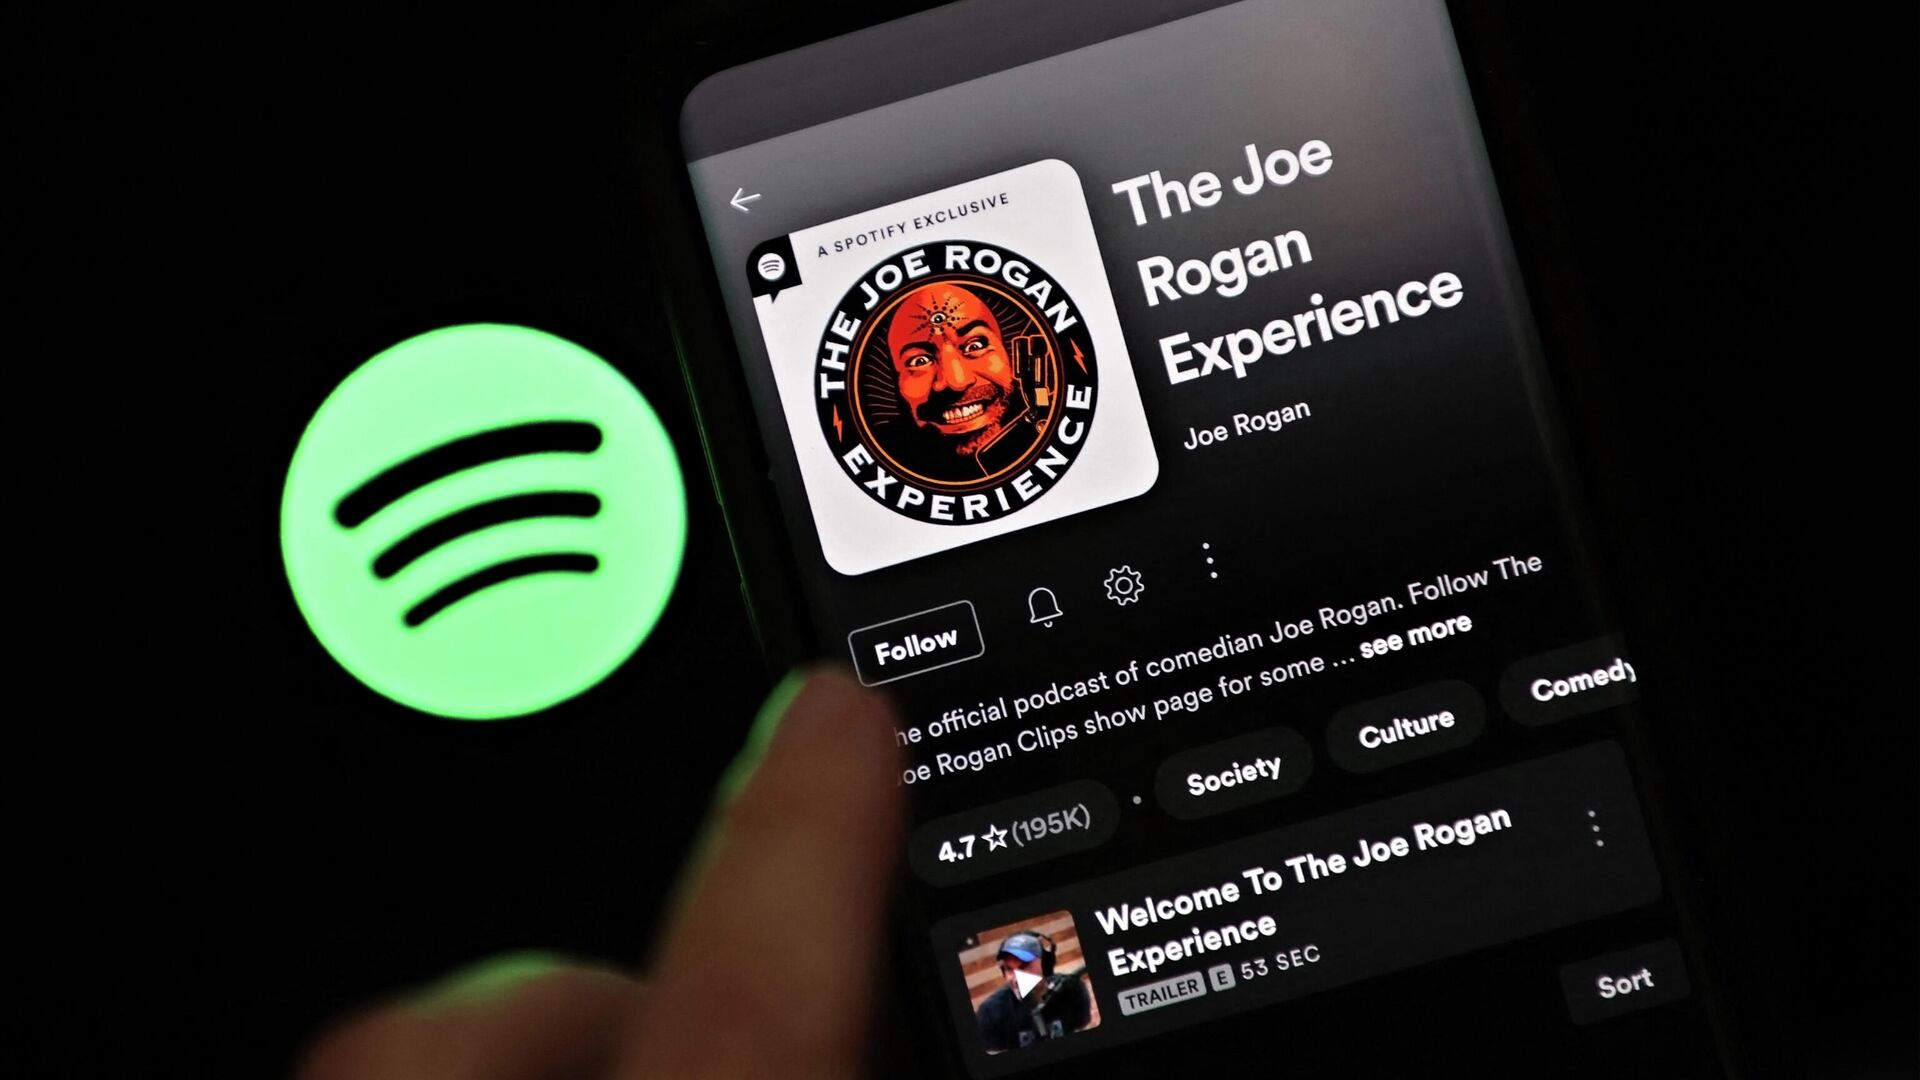 In this photo illustration, The Joe Rogan Experience podcast is viewed on Spotify's mobile app on January 31, 2022 in New York City. Several artists recently removed their music from Spotify in protest of hosting Joe Rogan's podcast. - Sputnik International, 1920, 02.02.2022